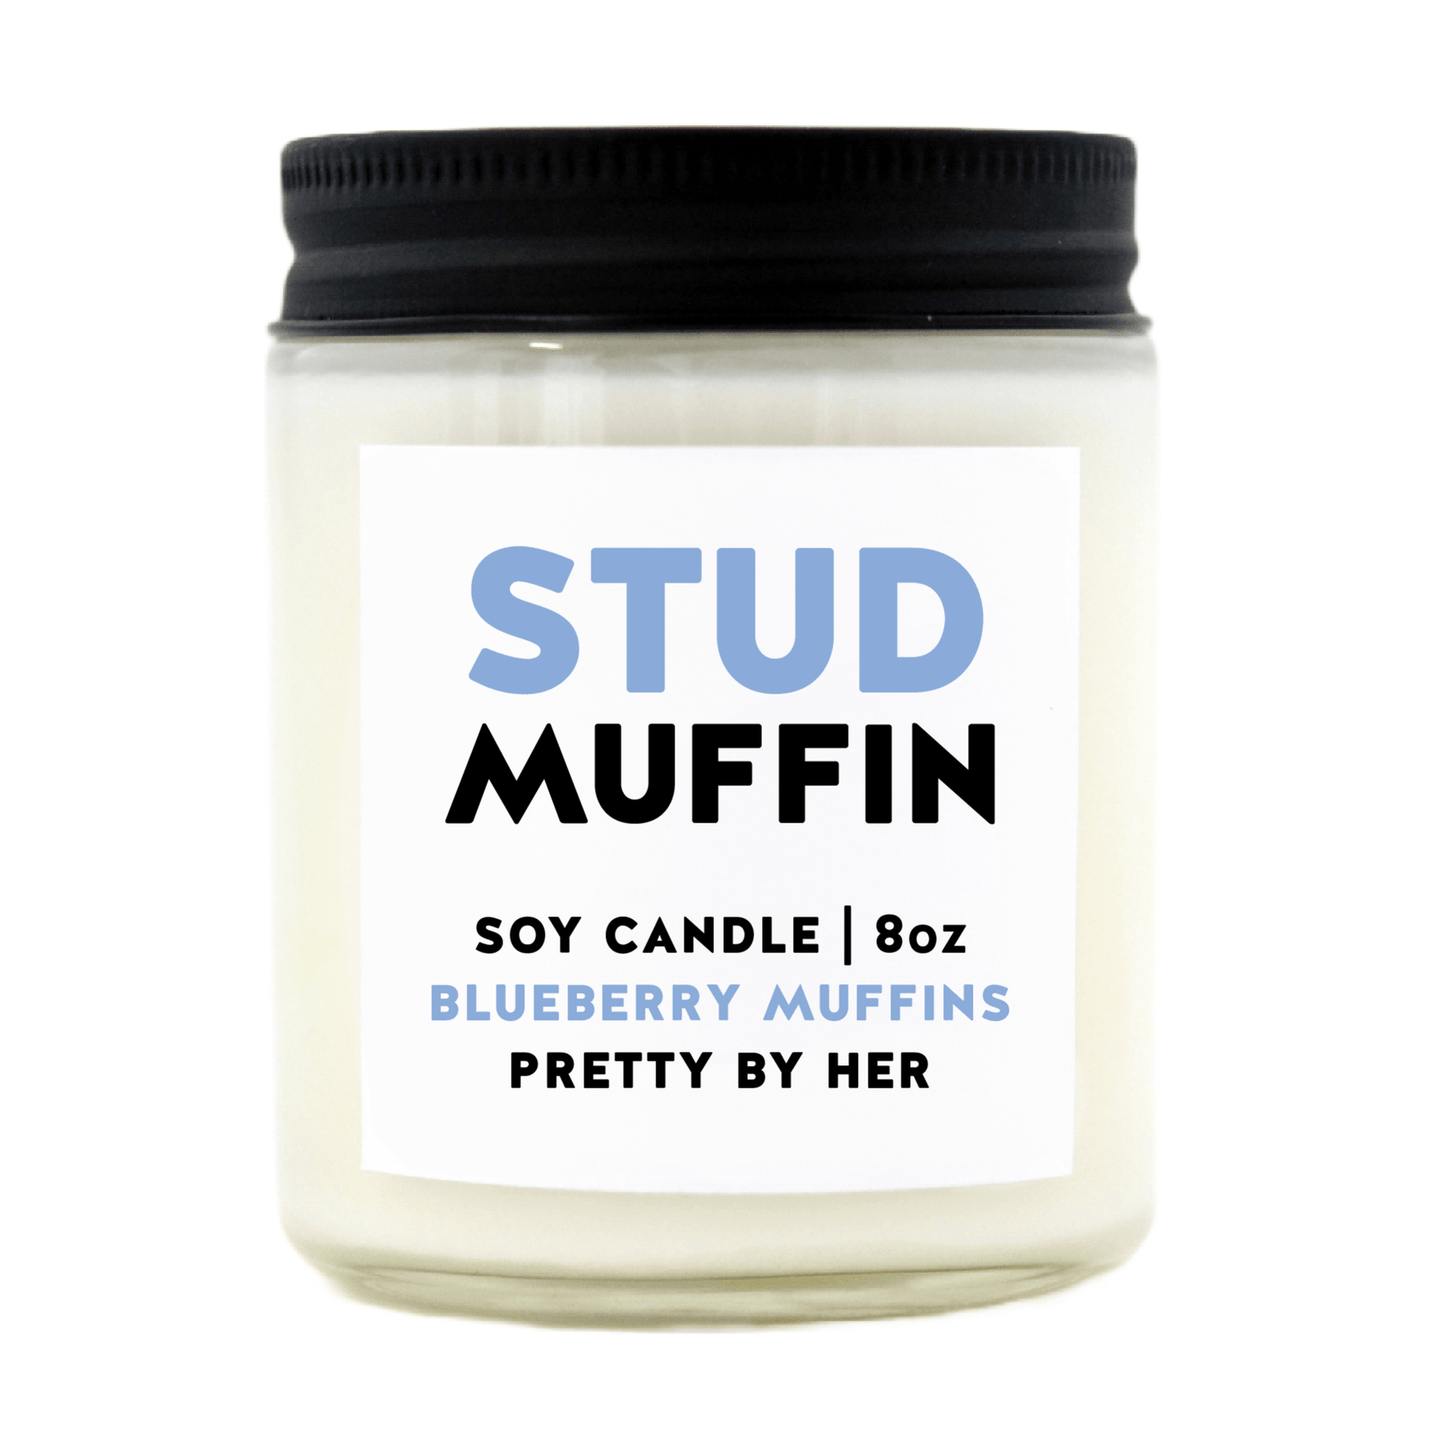 PBH Soy Candle Stud Muffin